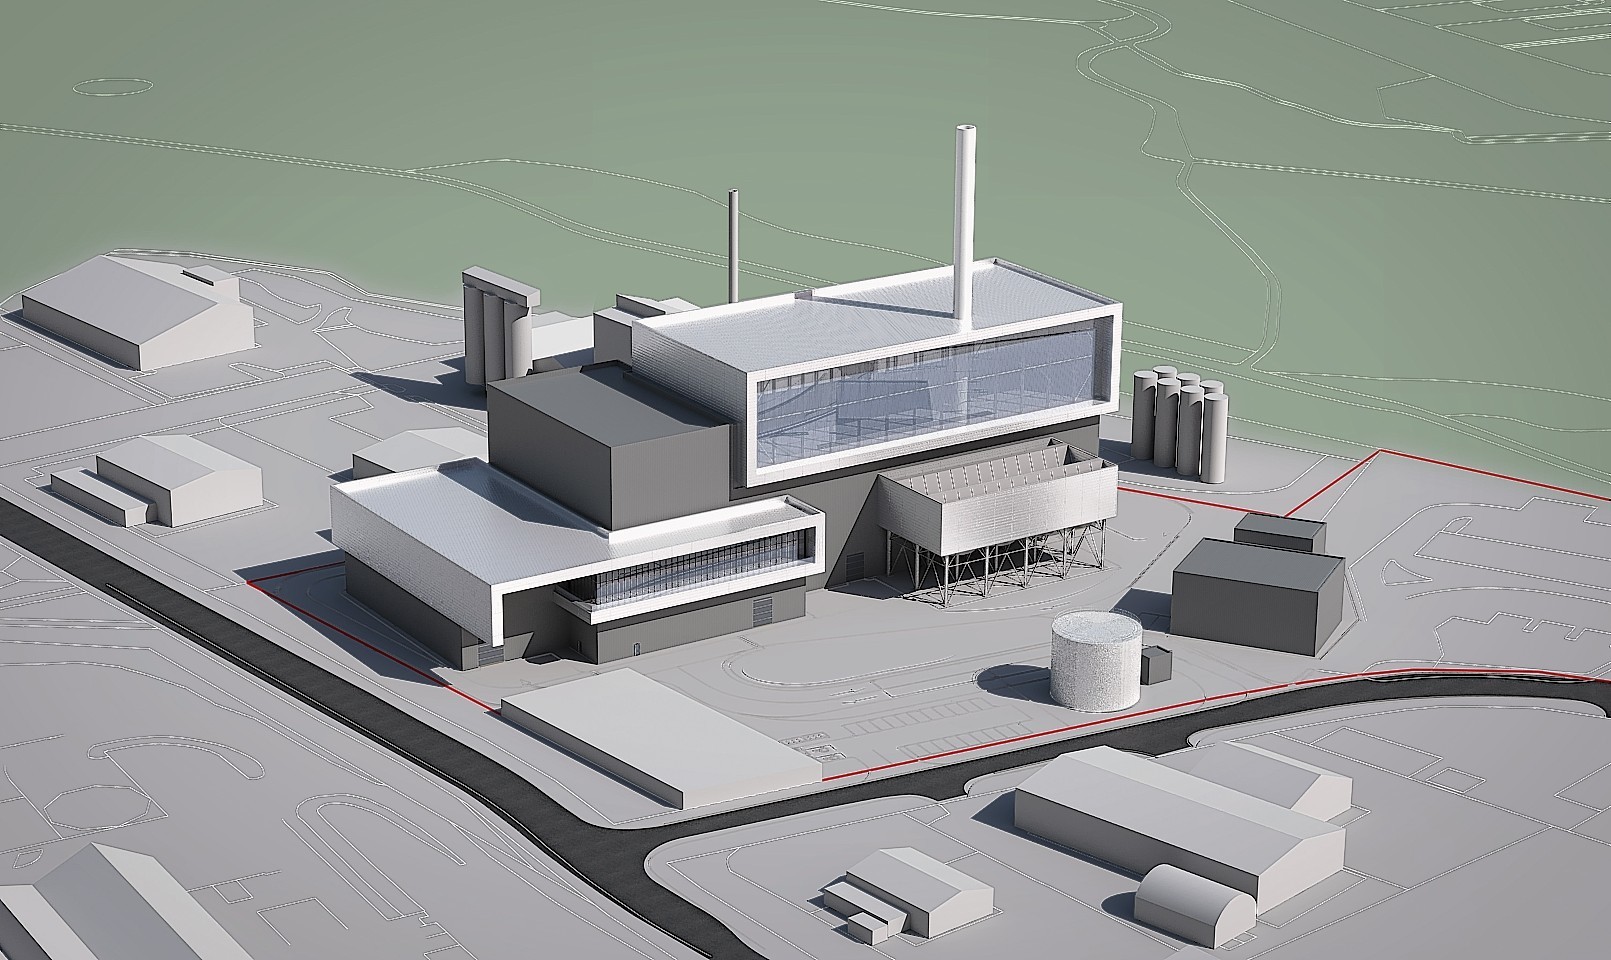 How the £150million facility could look